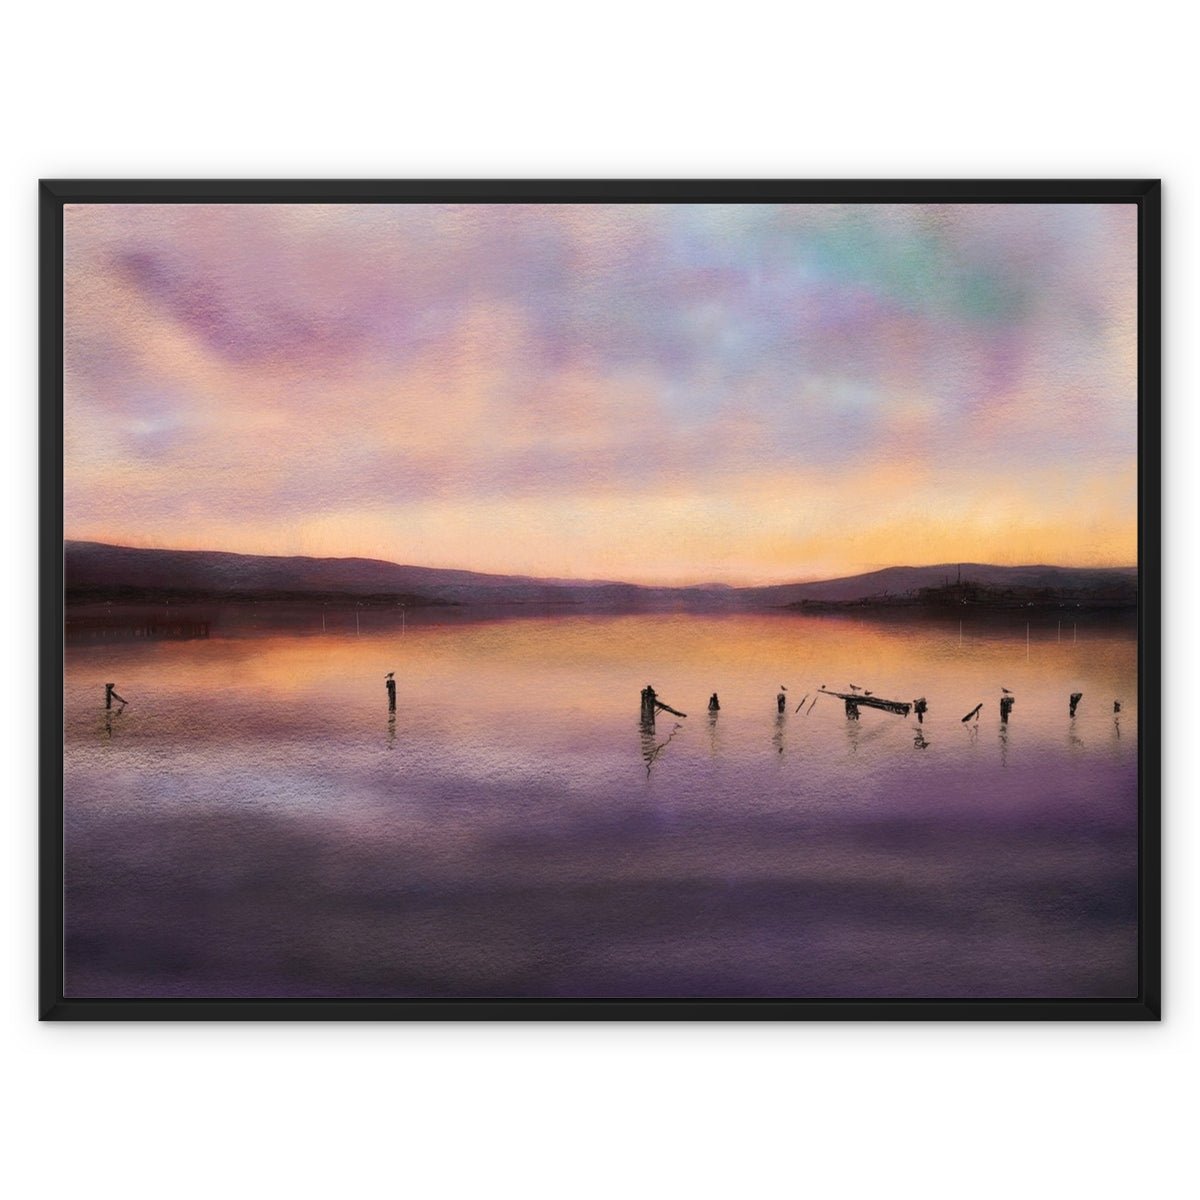 Admiralty Jetty Dusk Painting | Framed Canvas From Scotland-Floating Framed Canvas Prints-River Clyde Art Gallery-32"x24"-Black Frame-Paintings, Prints, Homeware, Art Gifts From Scotland By Scottish Artist Kevin Hunter